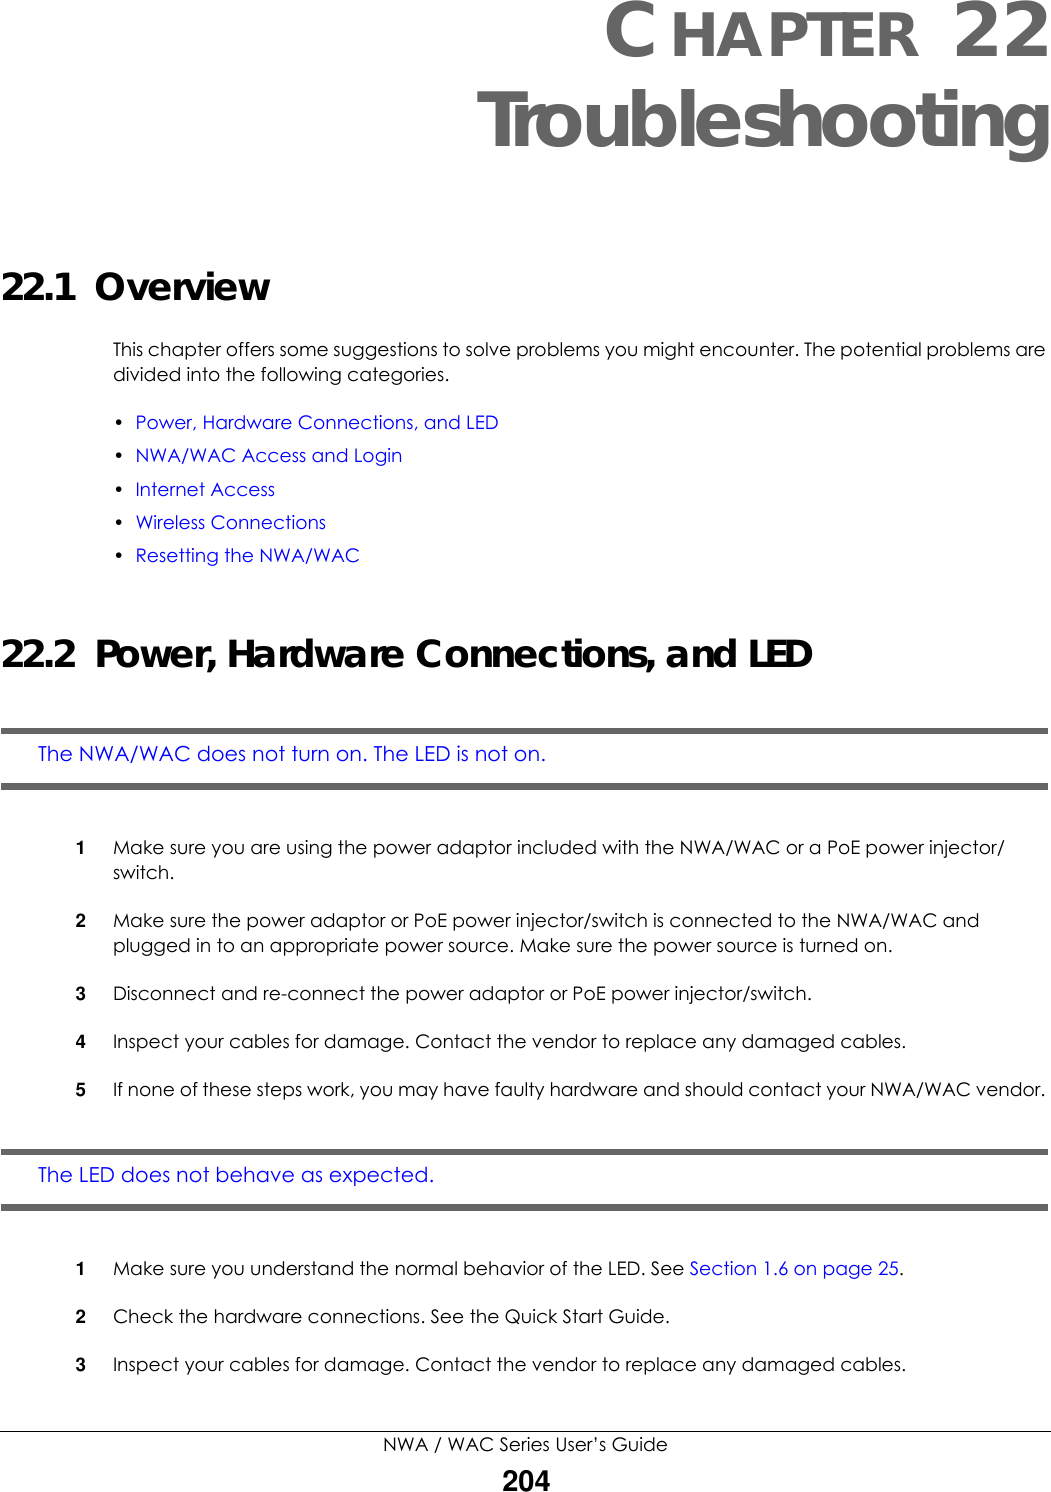 NWA / WAC Series User’s Guide204CHAPTER 22Troubleshooting22.1  OverviewThis chapter offers some suggestions to solve problems you might encounter. The potential problems are divided into the following categories.•Power, Hardware Connections, and LED•NWA/WAC Access and Login•Internet Access•Wireless Connections•Resetting the NWA/WAC22.2  Power, Hardware Connections, and LEDThe NWA/WAC does not turn on. The LED is not on.1Make sure you are using the power adaptor included with the NWA/WAC or a PoE power injector/switch.2Make sure the power adaptor or PoE power injector/switch is connected to the NWA/WAC and plugged in to an appropriate power source. Make sure the power source is turned on.3Disconnect and re-connect the power adaptor or PoE power injector/switch.4Inspect your cables for damage. Contact the vendor to replace any damaged cables.5If none of these steps work, you may have faulty hardware and should contact your NWA/WAC vendor. The LED does not behave as expected.1Make sure you understand the normal behavior of the LED. See Section 1.6 on page 25.2Check the hardware connections. See the Quick Start Guide.3Inspect your cables for damage. Contact the vendor to replace any damaged cables.